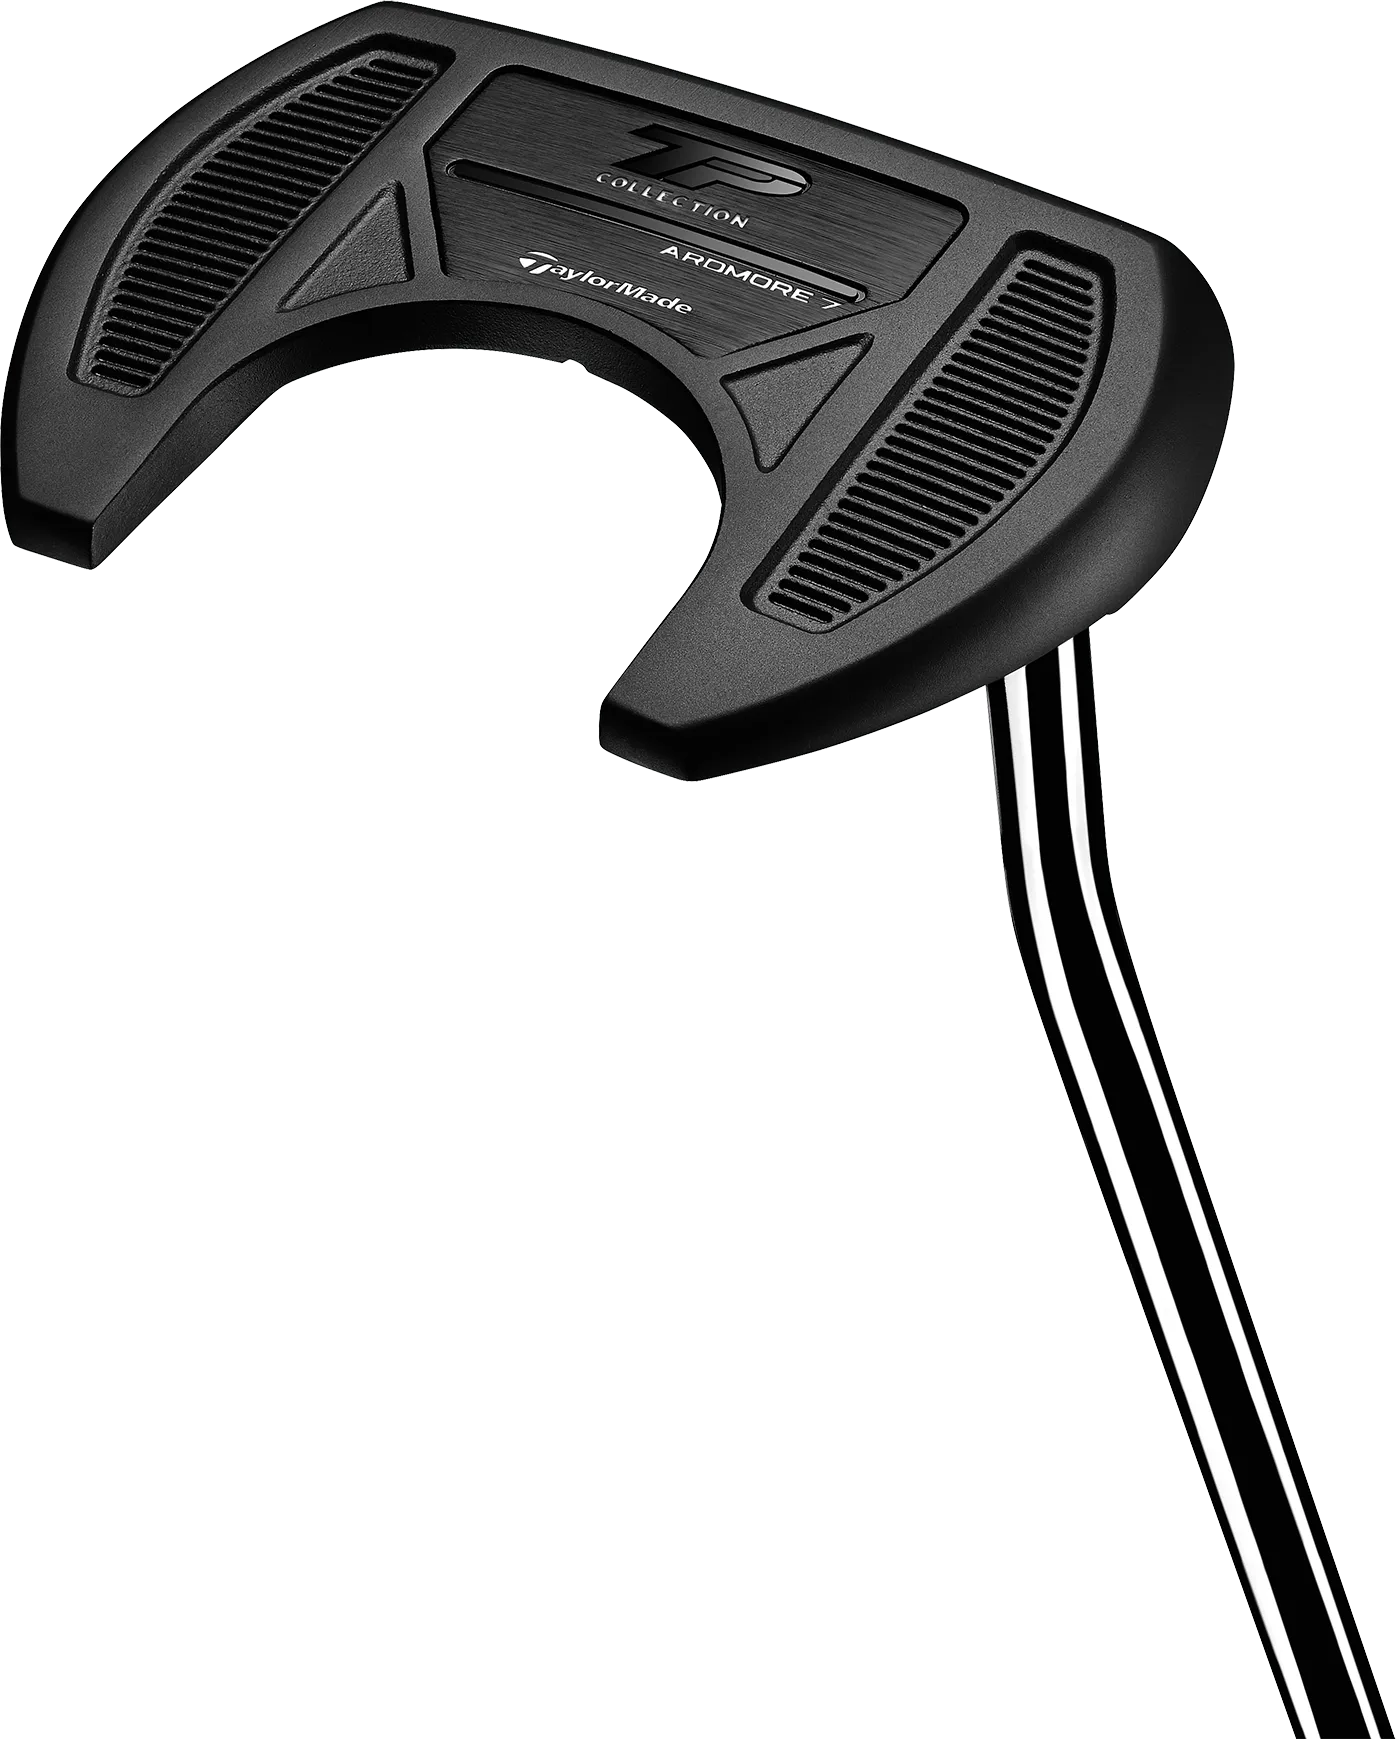 TaylorMade TP Black Edition Ardmore #7 Putter